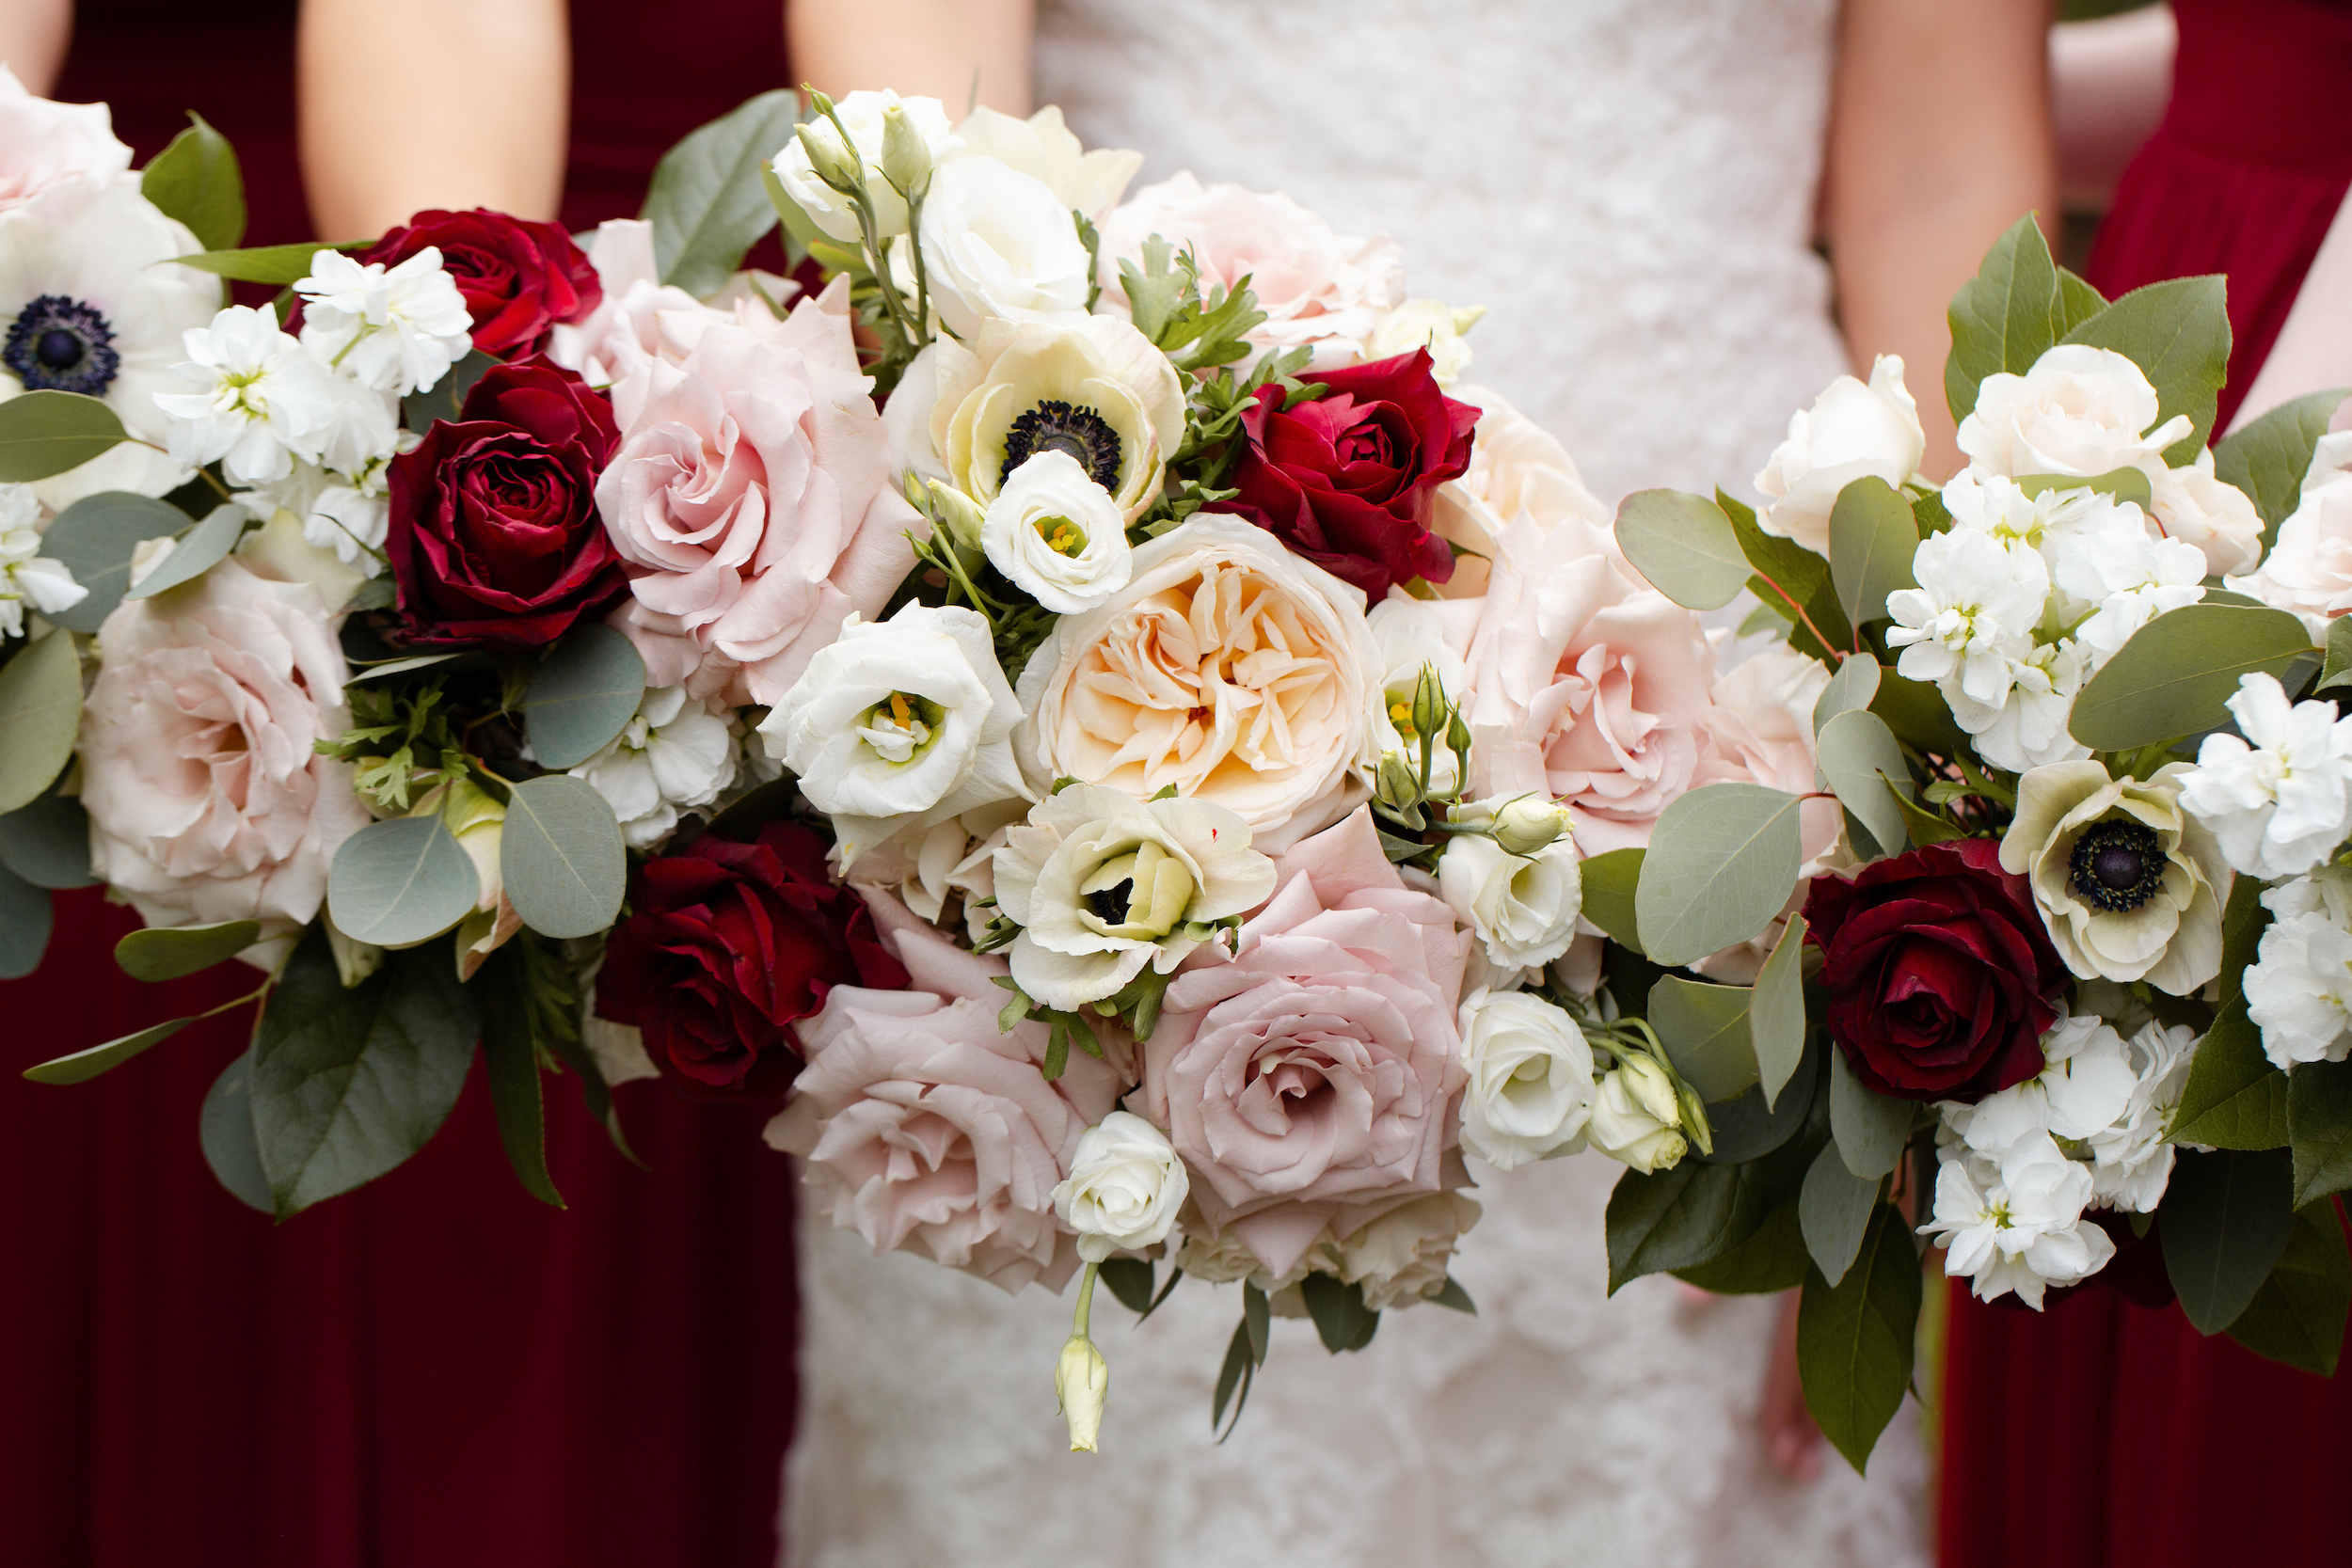 The bride and bridesmaids hold their blush and burgundy flower bouquets close to the camera lens.